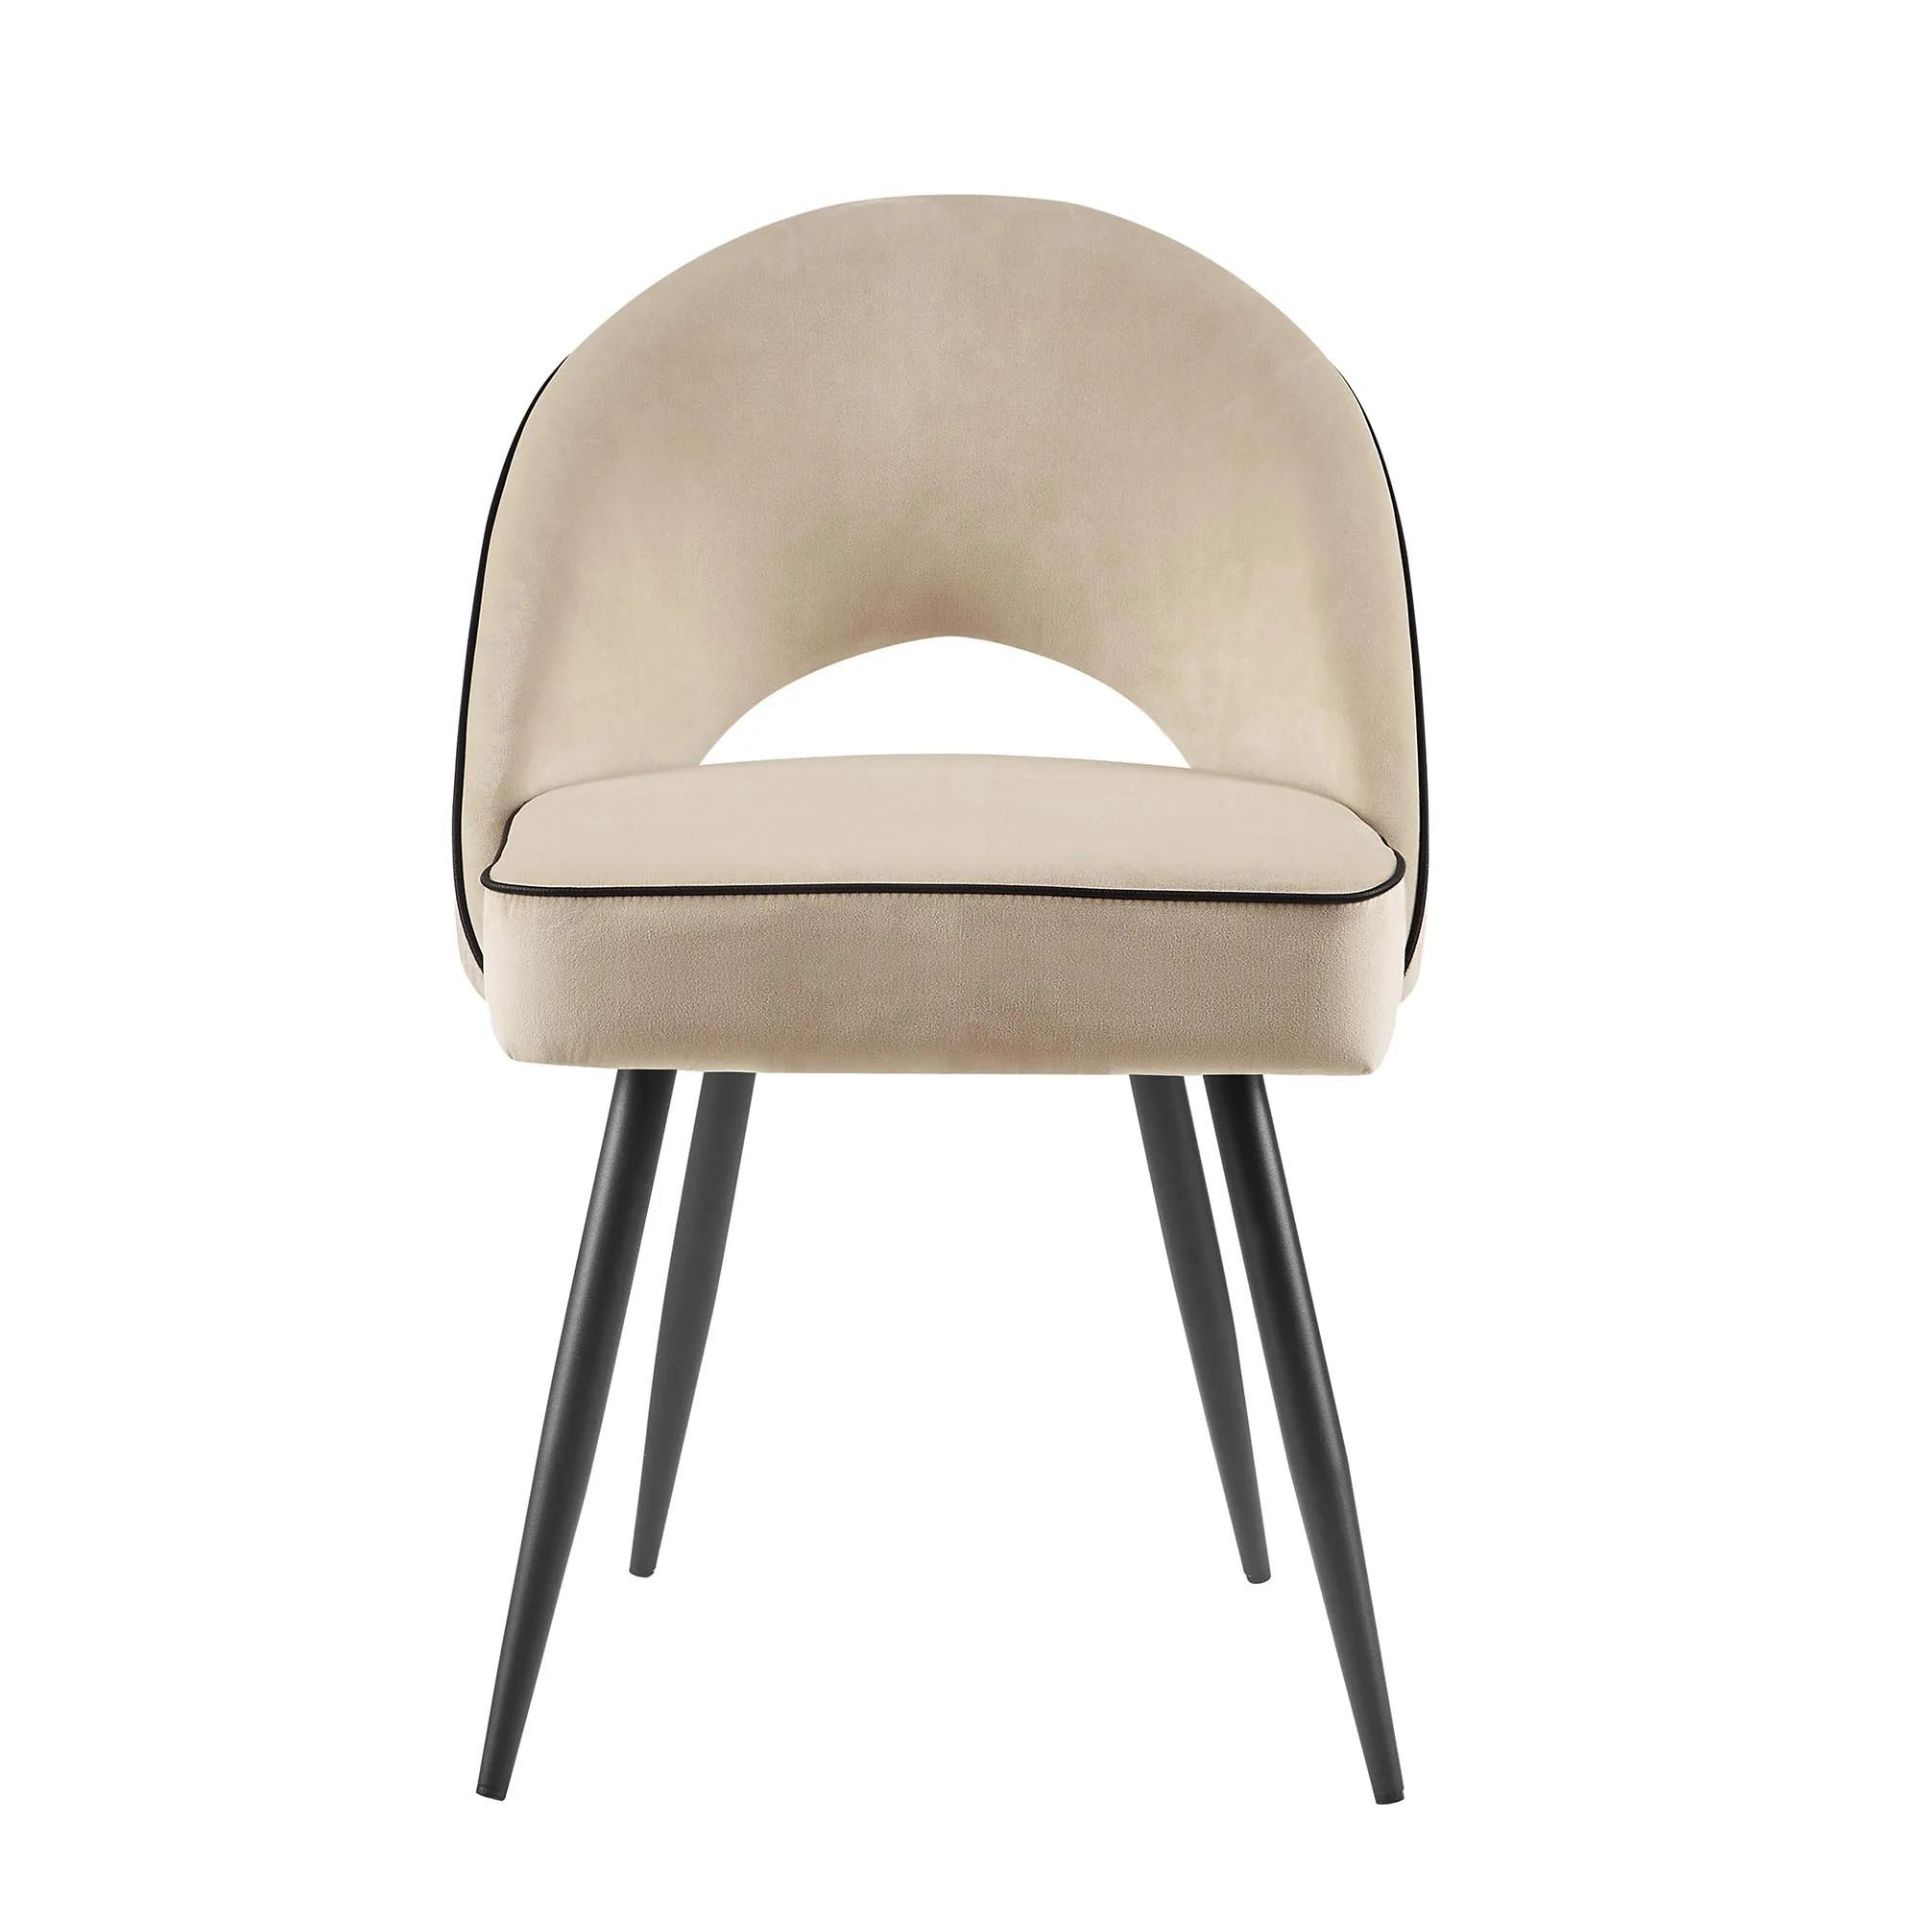 Oakley Set of 2 Champagne Velvet Upholstered Dining Chairs with Contrast Piping. - R14. RRP £269.99. - Bild 2 aus 2